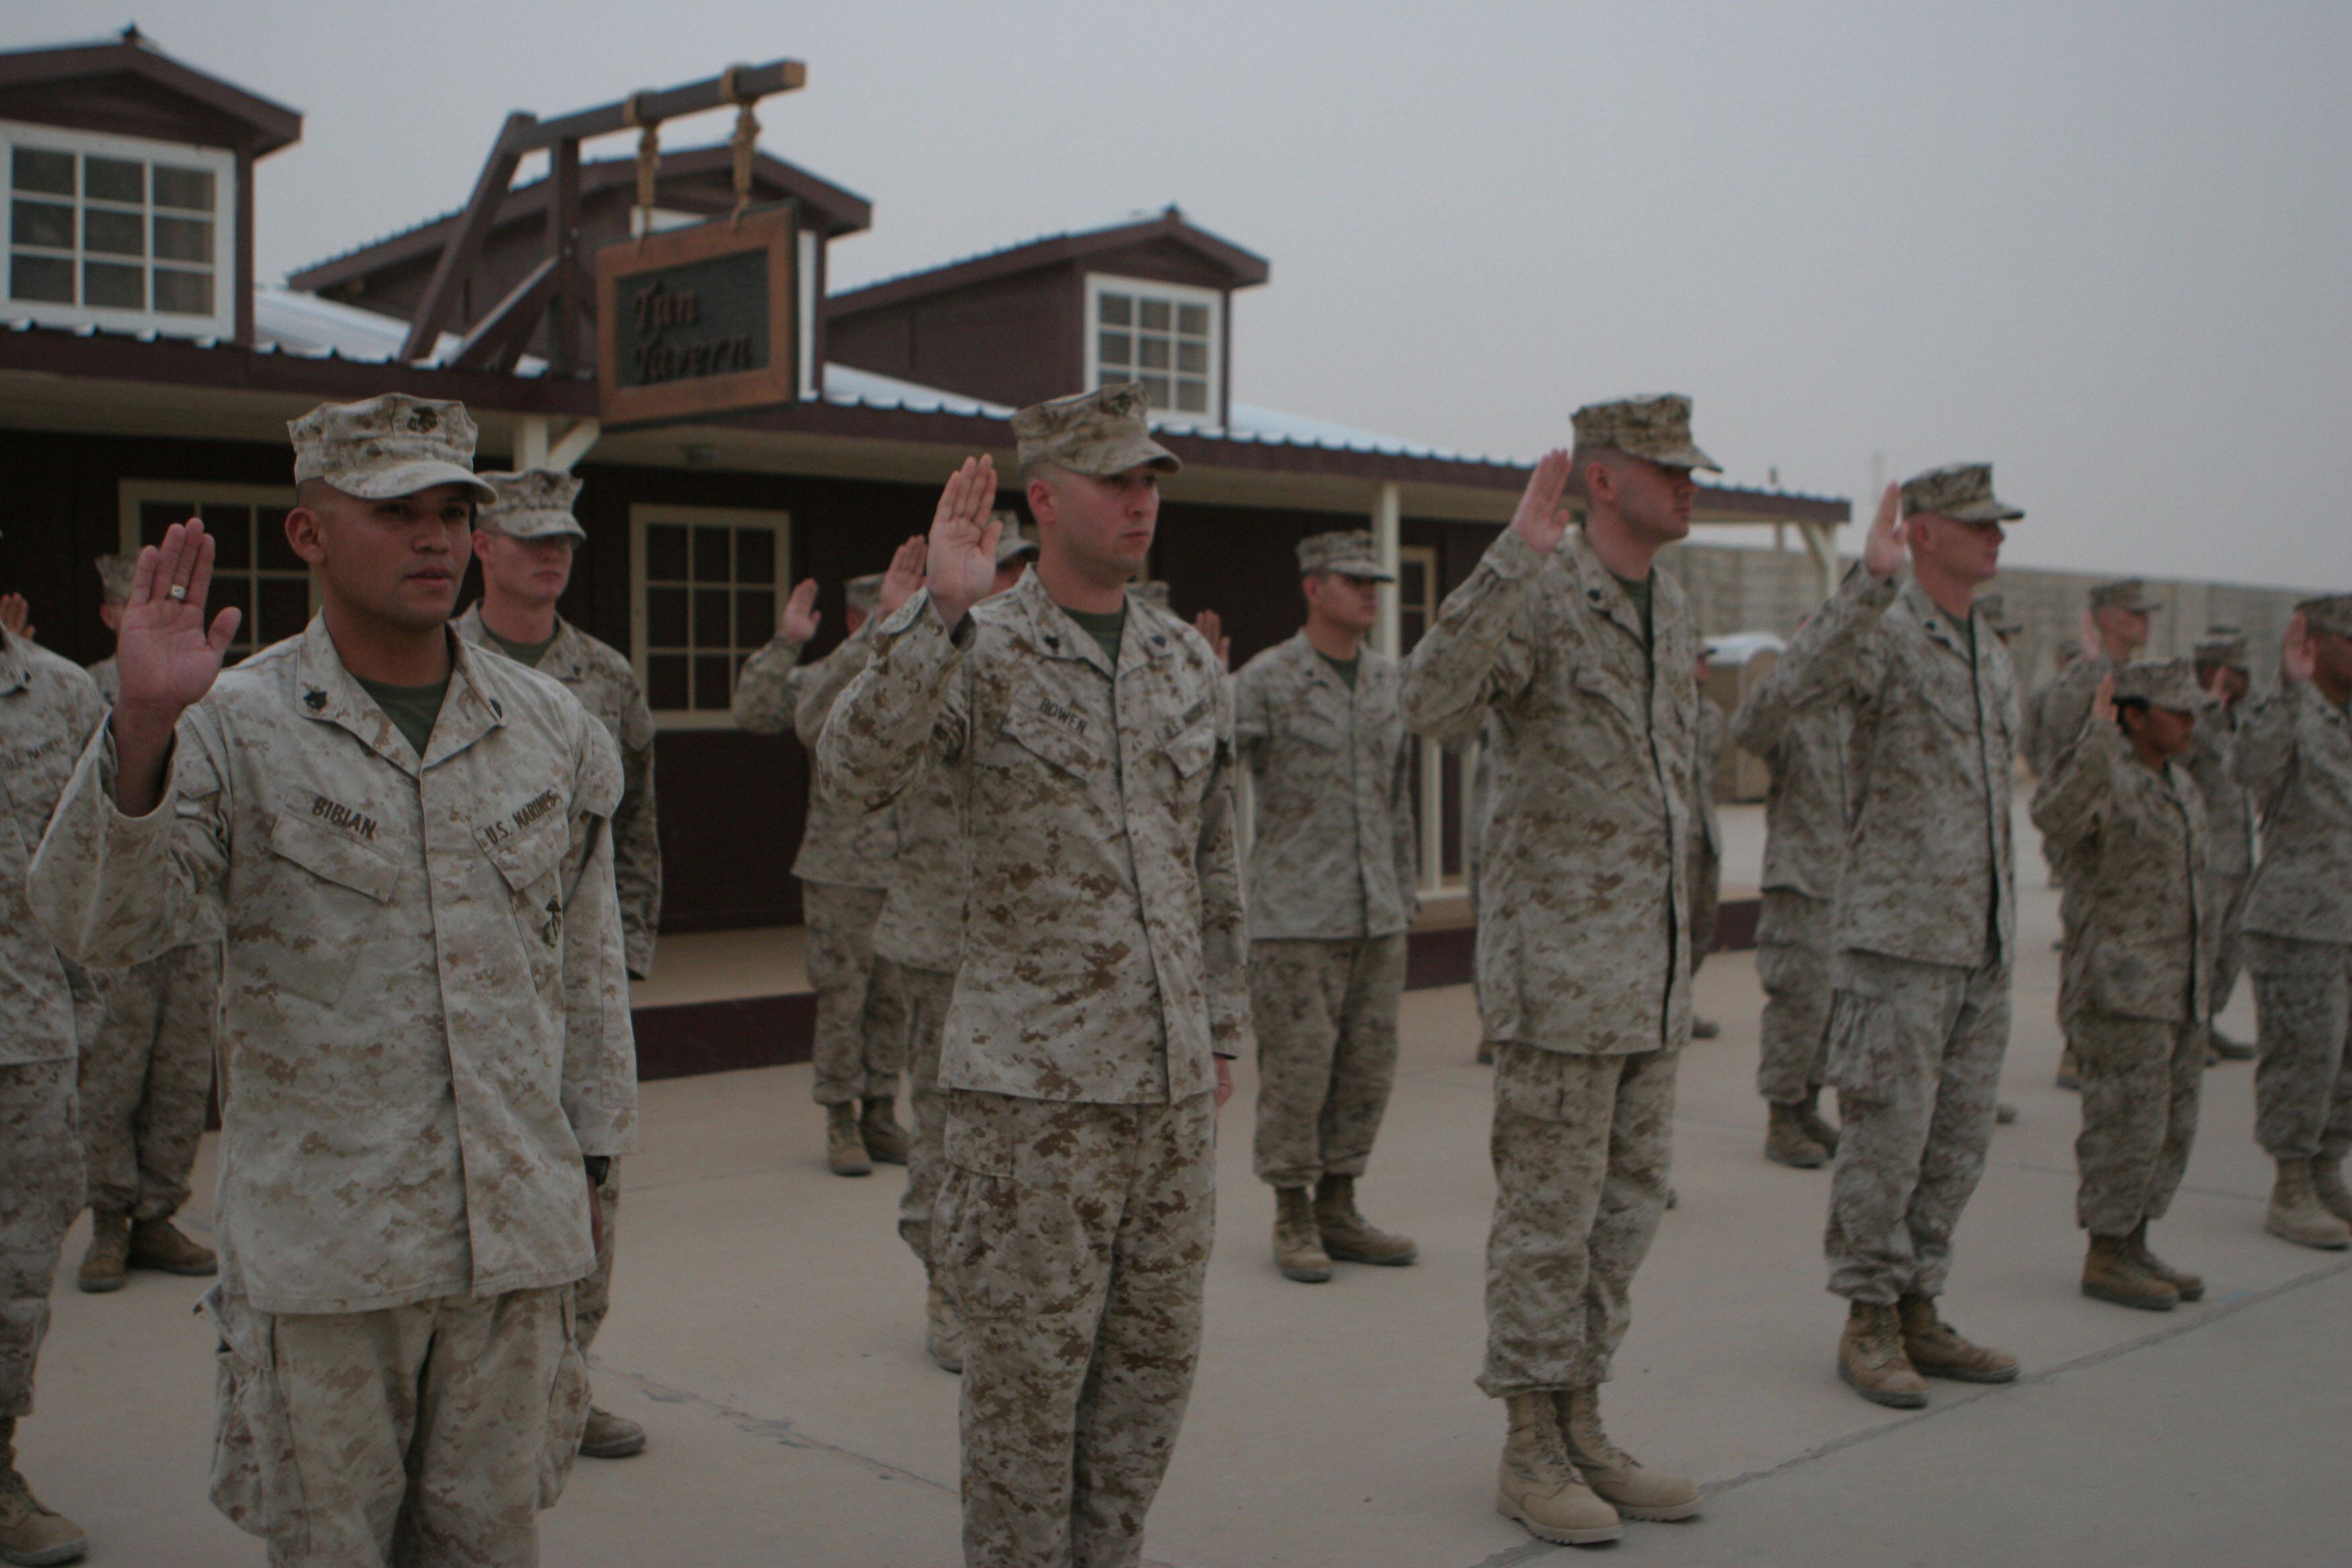 The Marine Corps wants to know what will convince you to reenlist